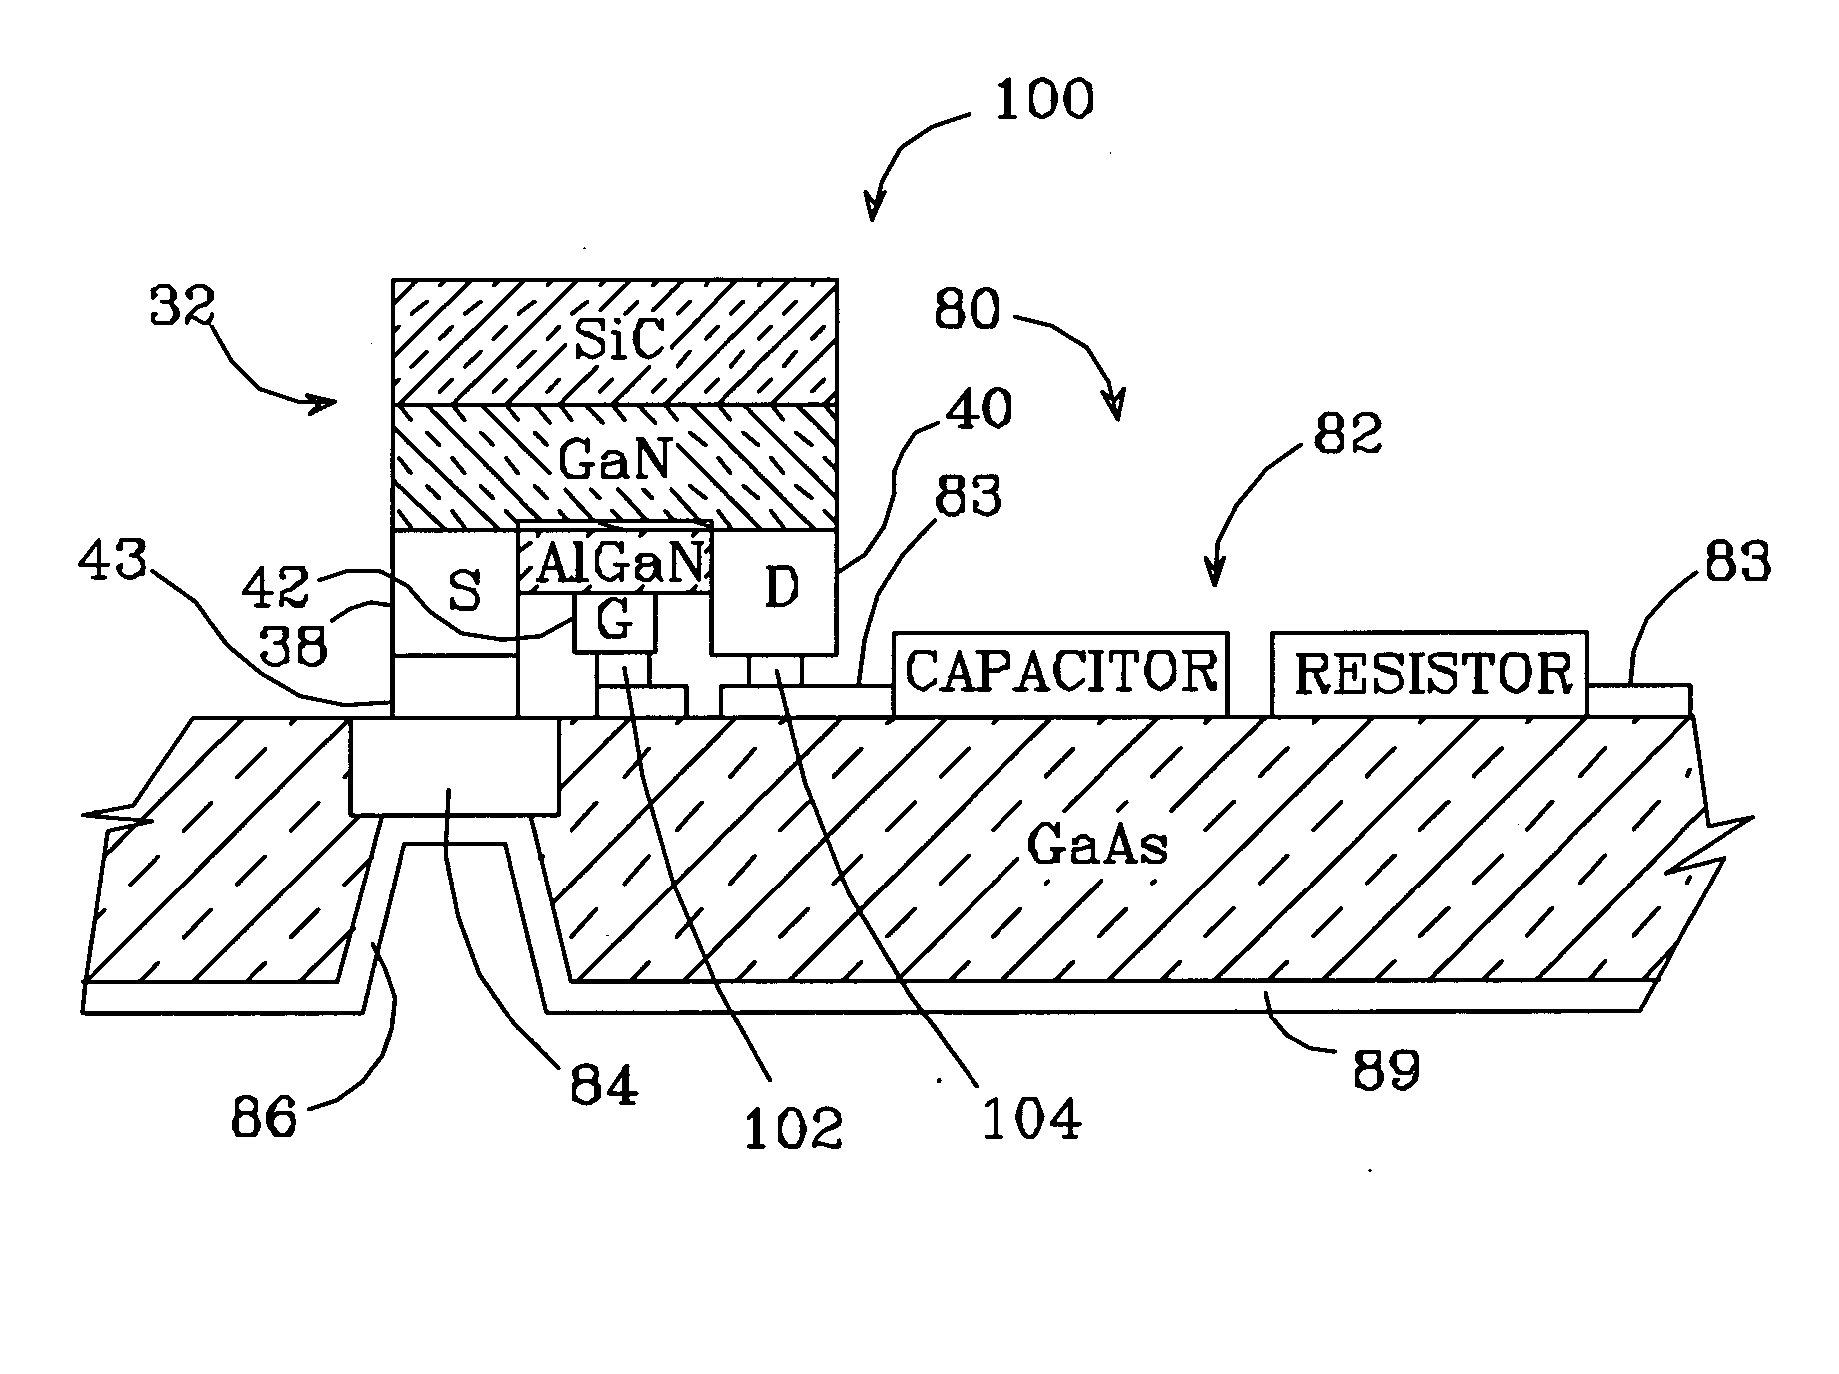 Group III nitride based flip-chip integrated circuit and method for fabricating